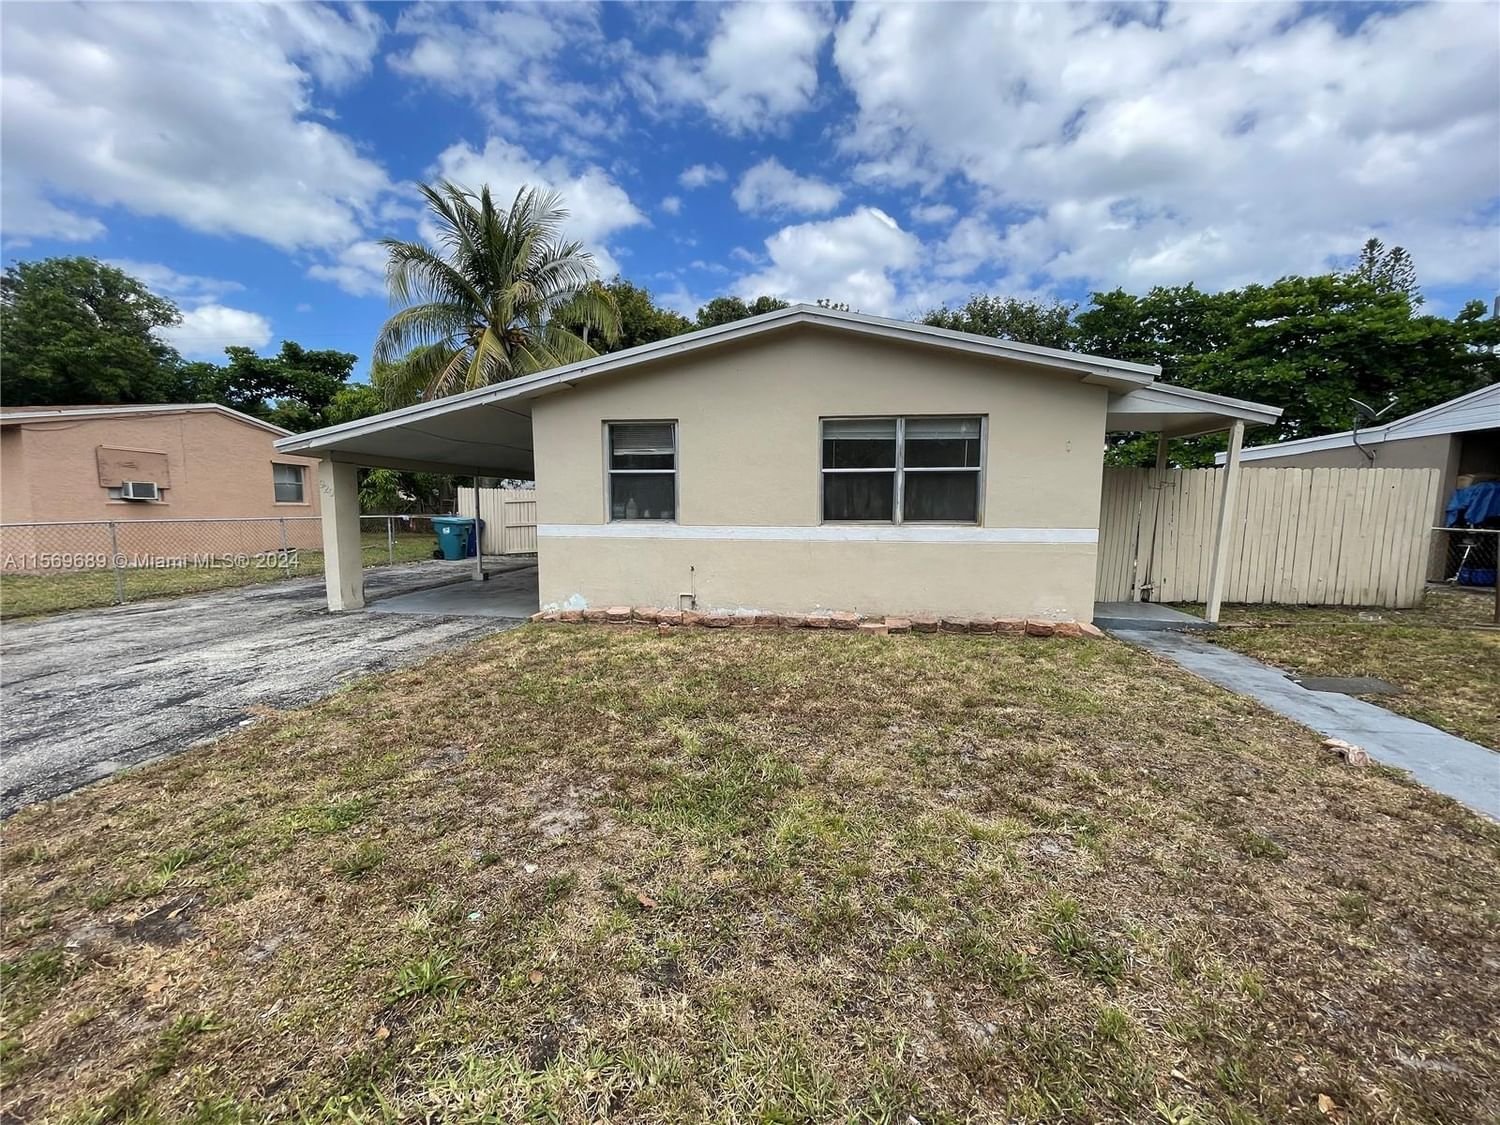 Real estate property located at 920 34th Way, Broward County, SUNRISE HEIGHTS, Lauderhill, FL